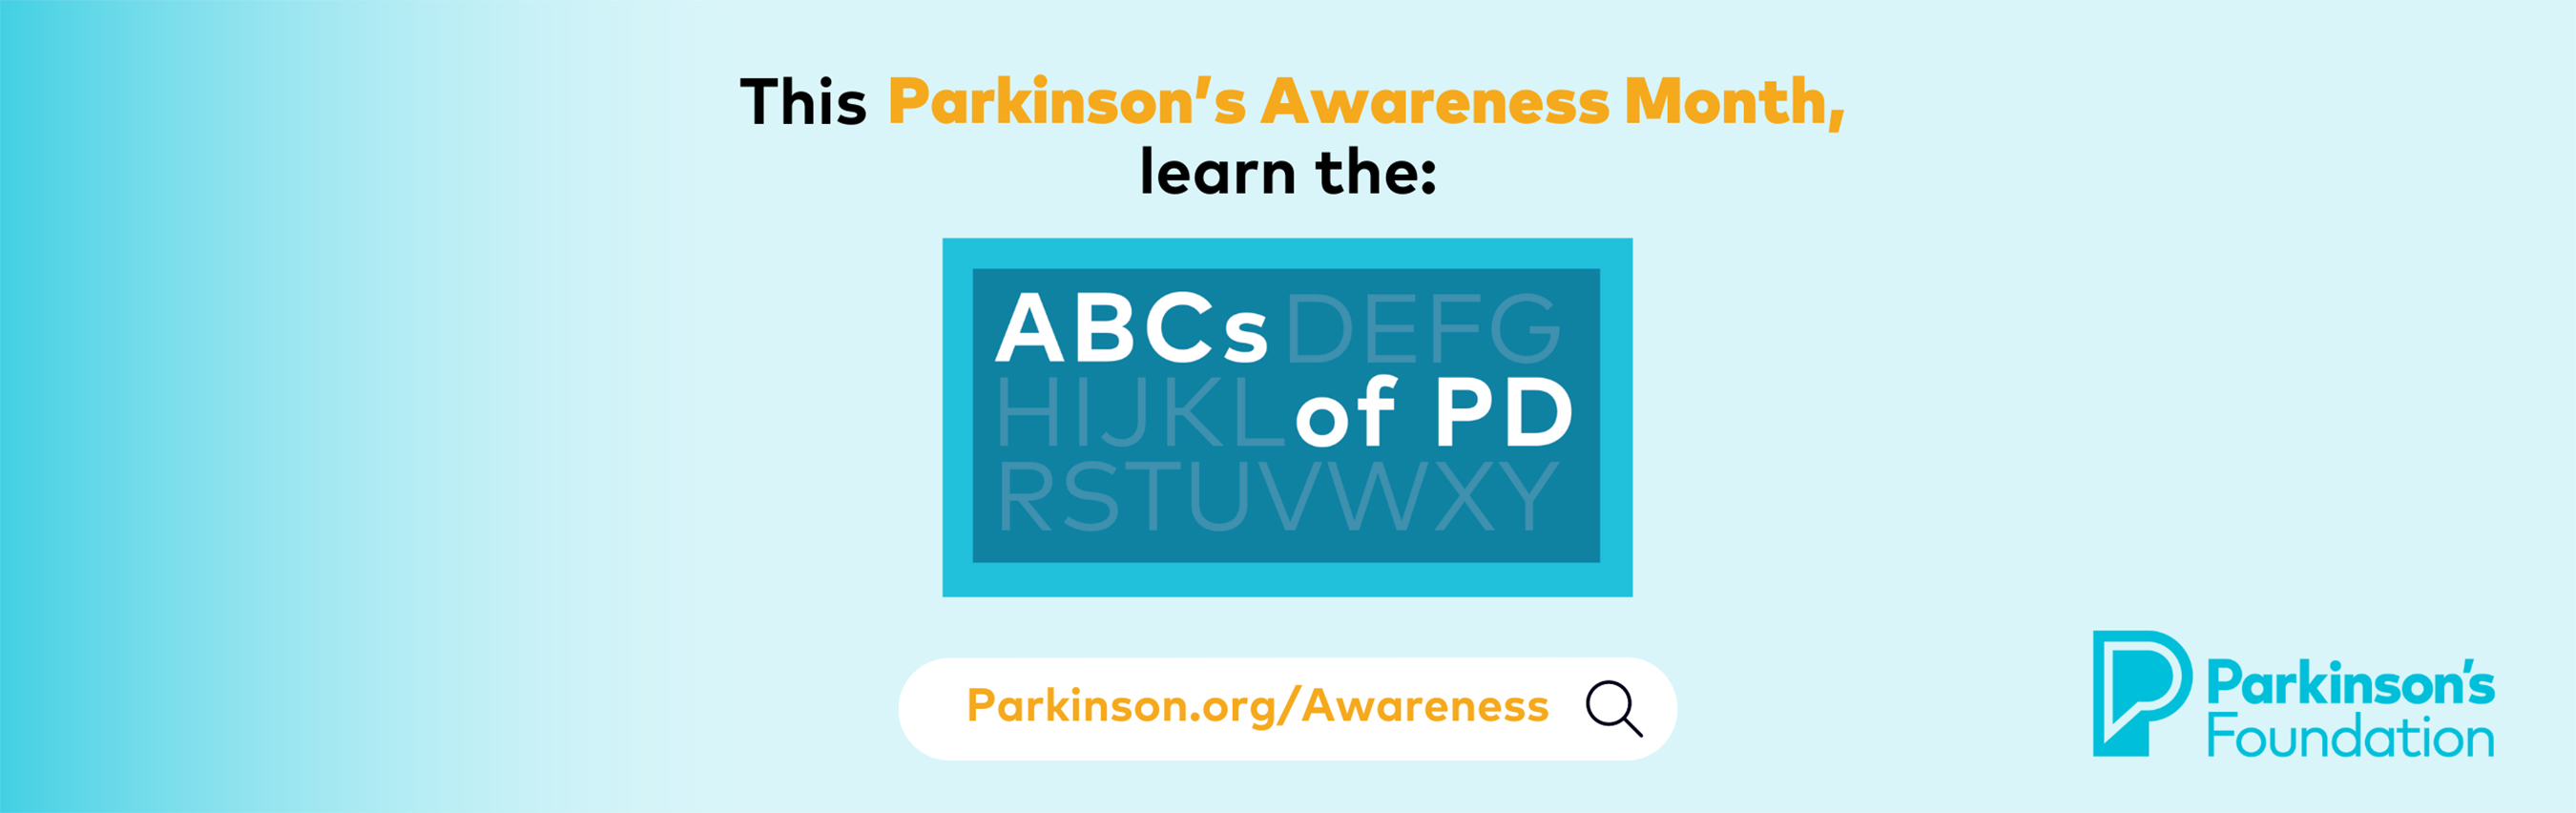 The Parkinson's Foundation honors Parkinson's Awareness Month with the launch of a new campaign, #ABCsOfPD. The campaign aims to raise awareness for Parkinson's disease (PD) by educating the public about various facets of PD, its many intricacies and how to recognize its symptoms.